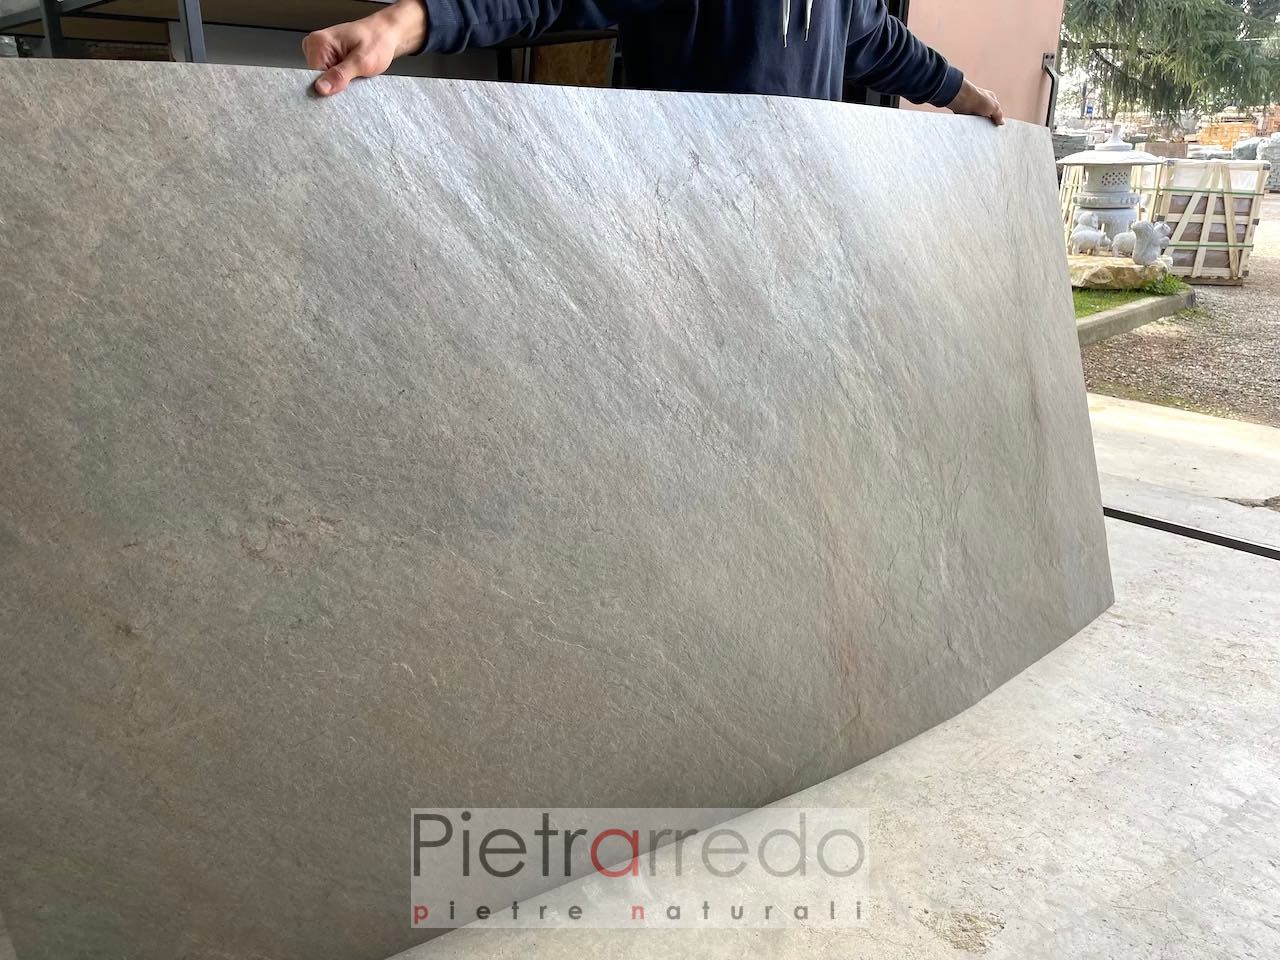 sheet in copper stone flexible natural wall covering 244cm x 122cm price pietrarredo onsale